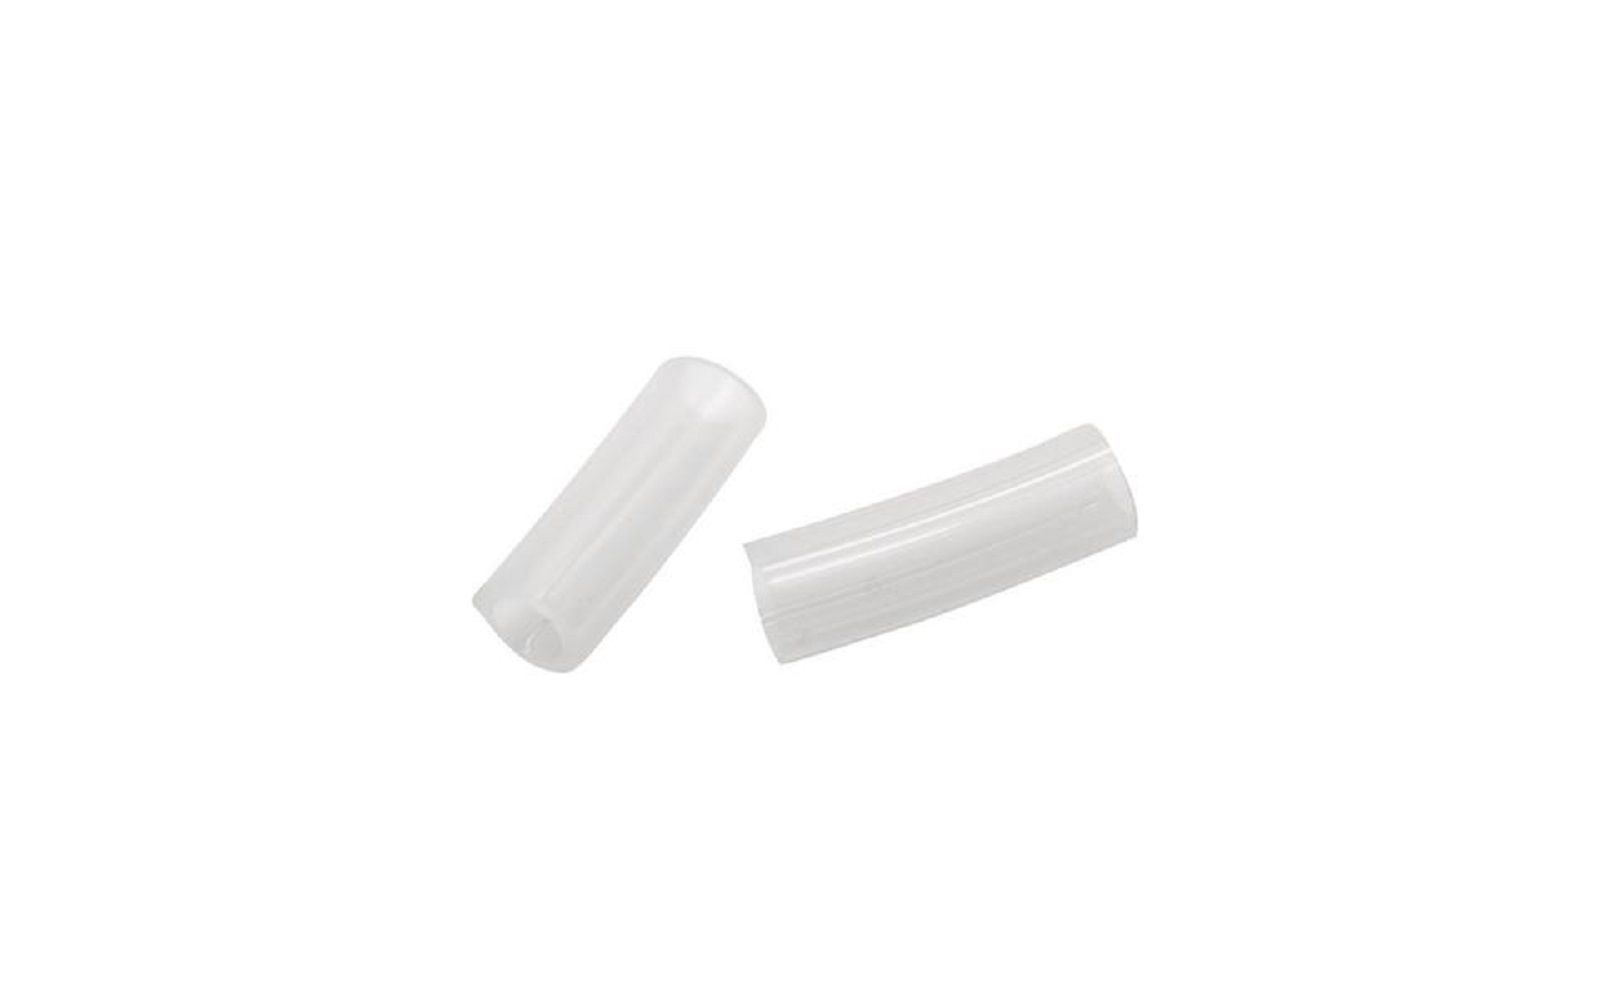 Patterson® mouth gag silicone replacement tips – molt, 2/pkg